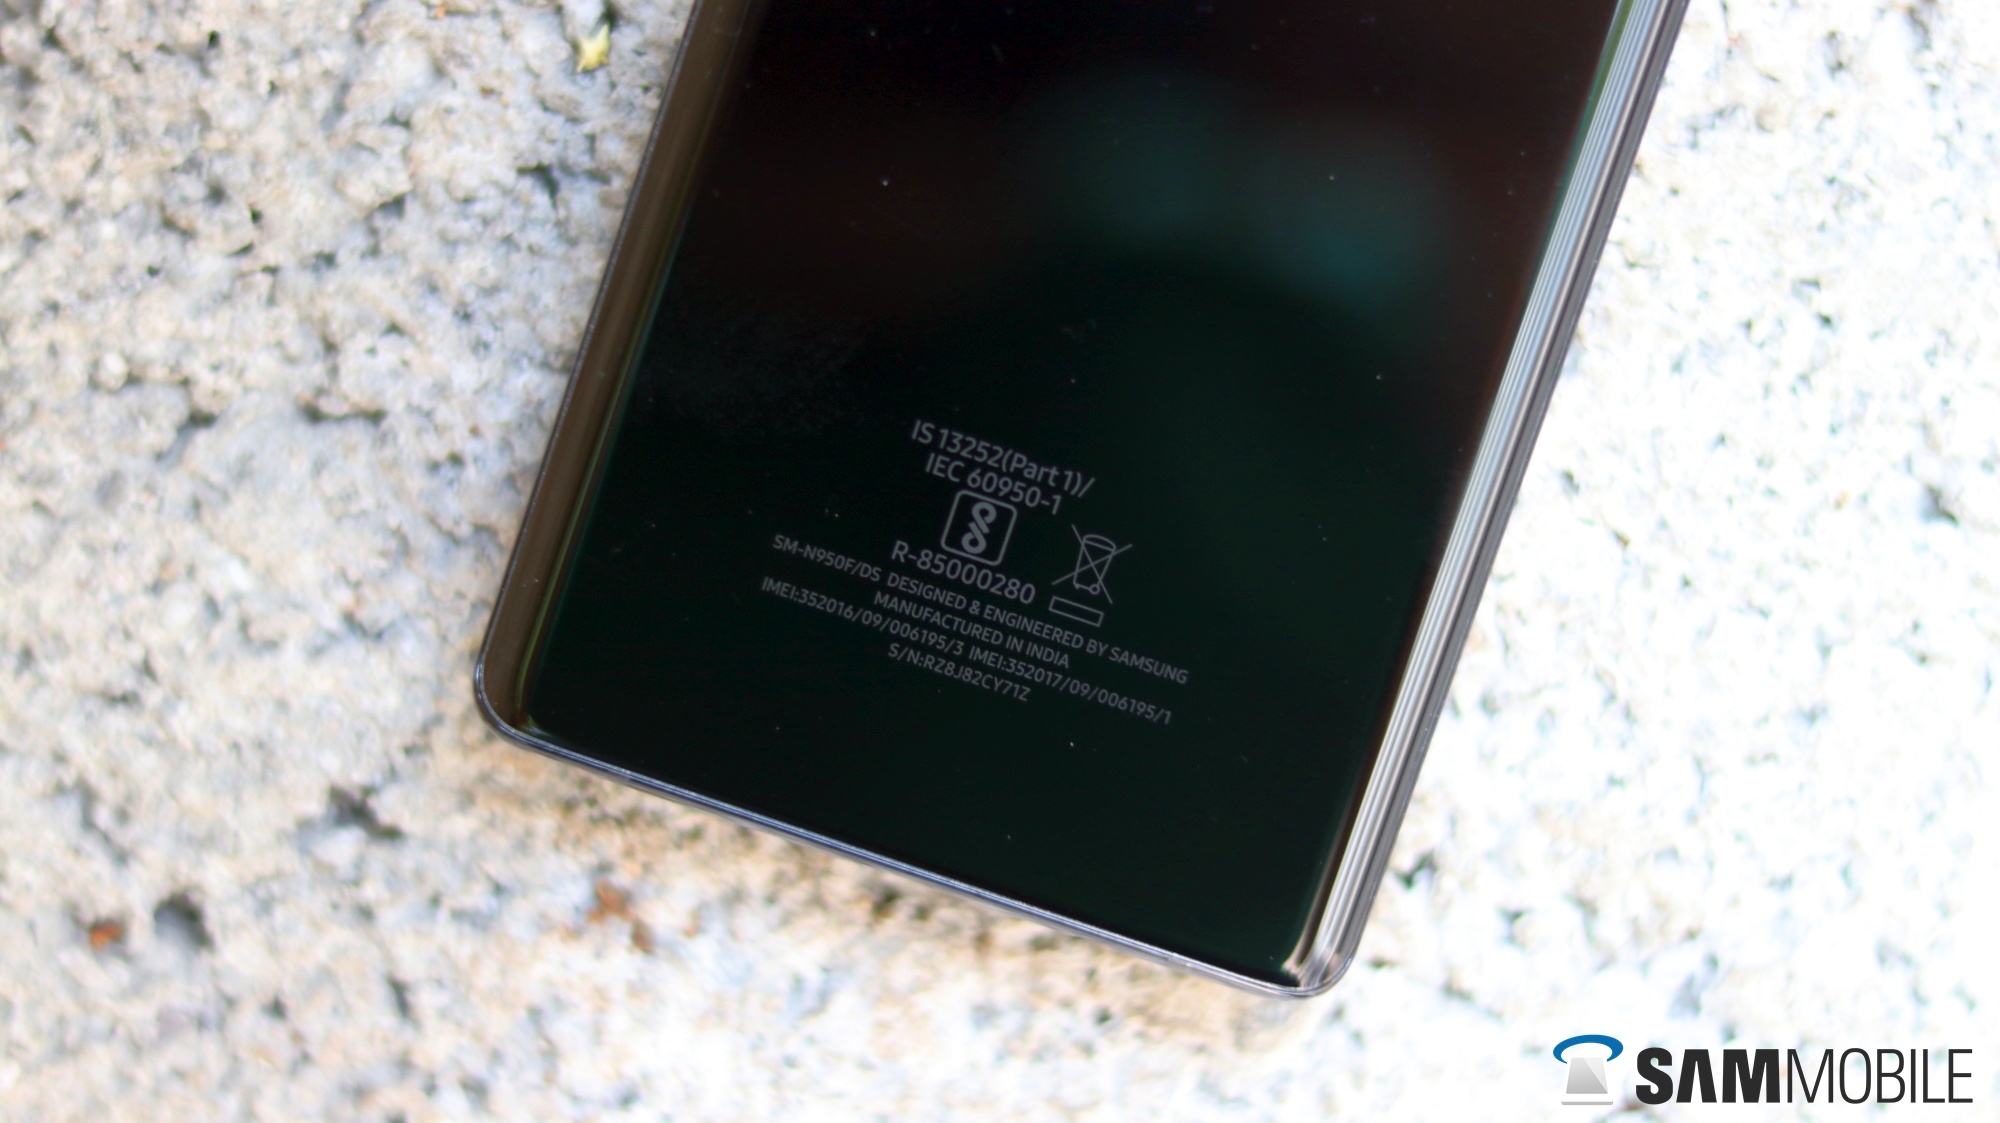 Fact or fiction? Galaxy Note 8 has ‘most generous battery capacity’ of any Note series device